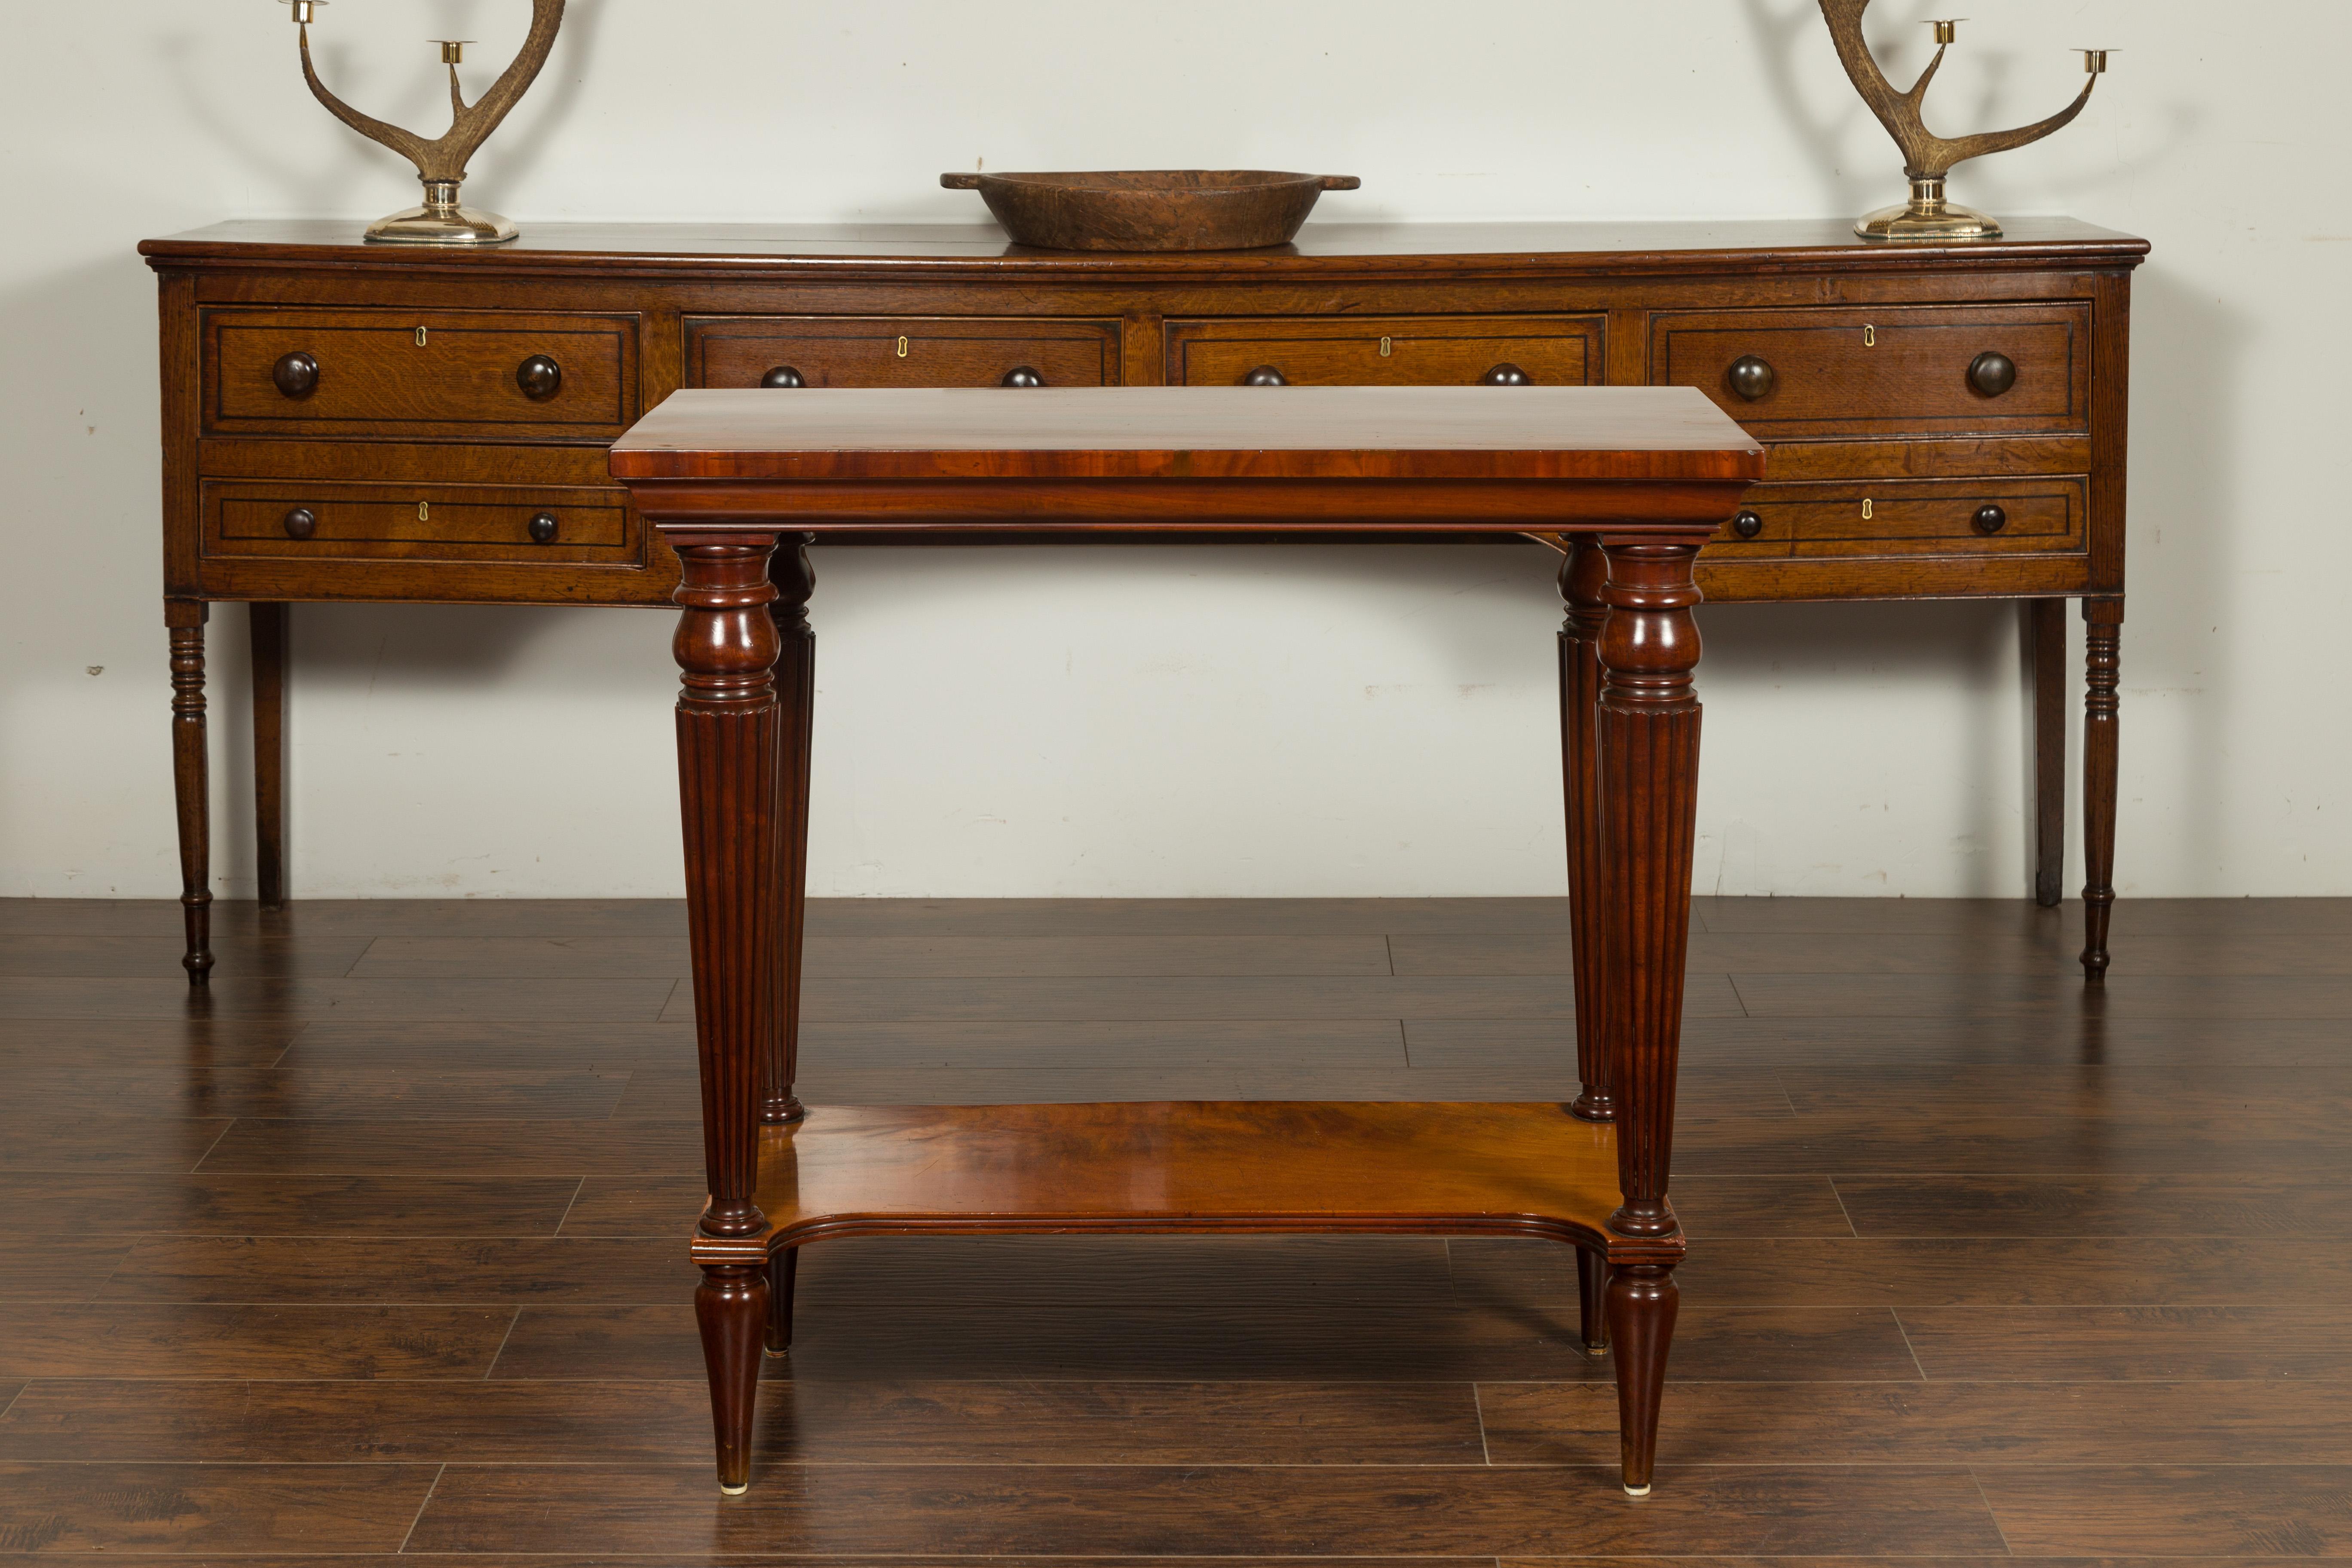 An English Regency period console table from the early 19th century, in the manner of Gillows of Lancaster & London. Created in England during the first quarter of the 19th century, this console table features a rectangular top sitting above four